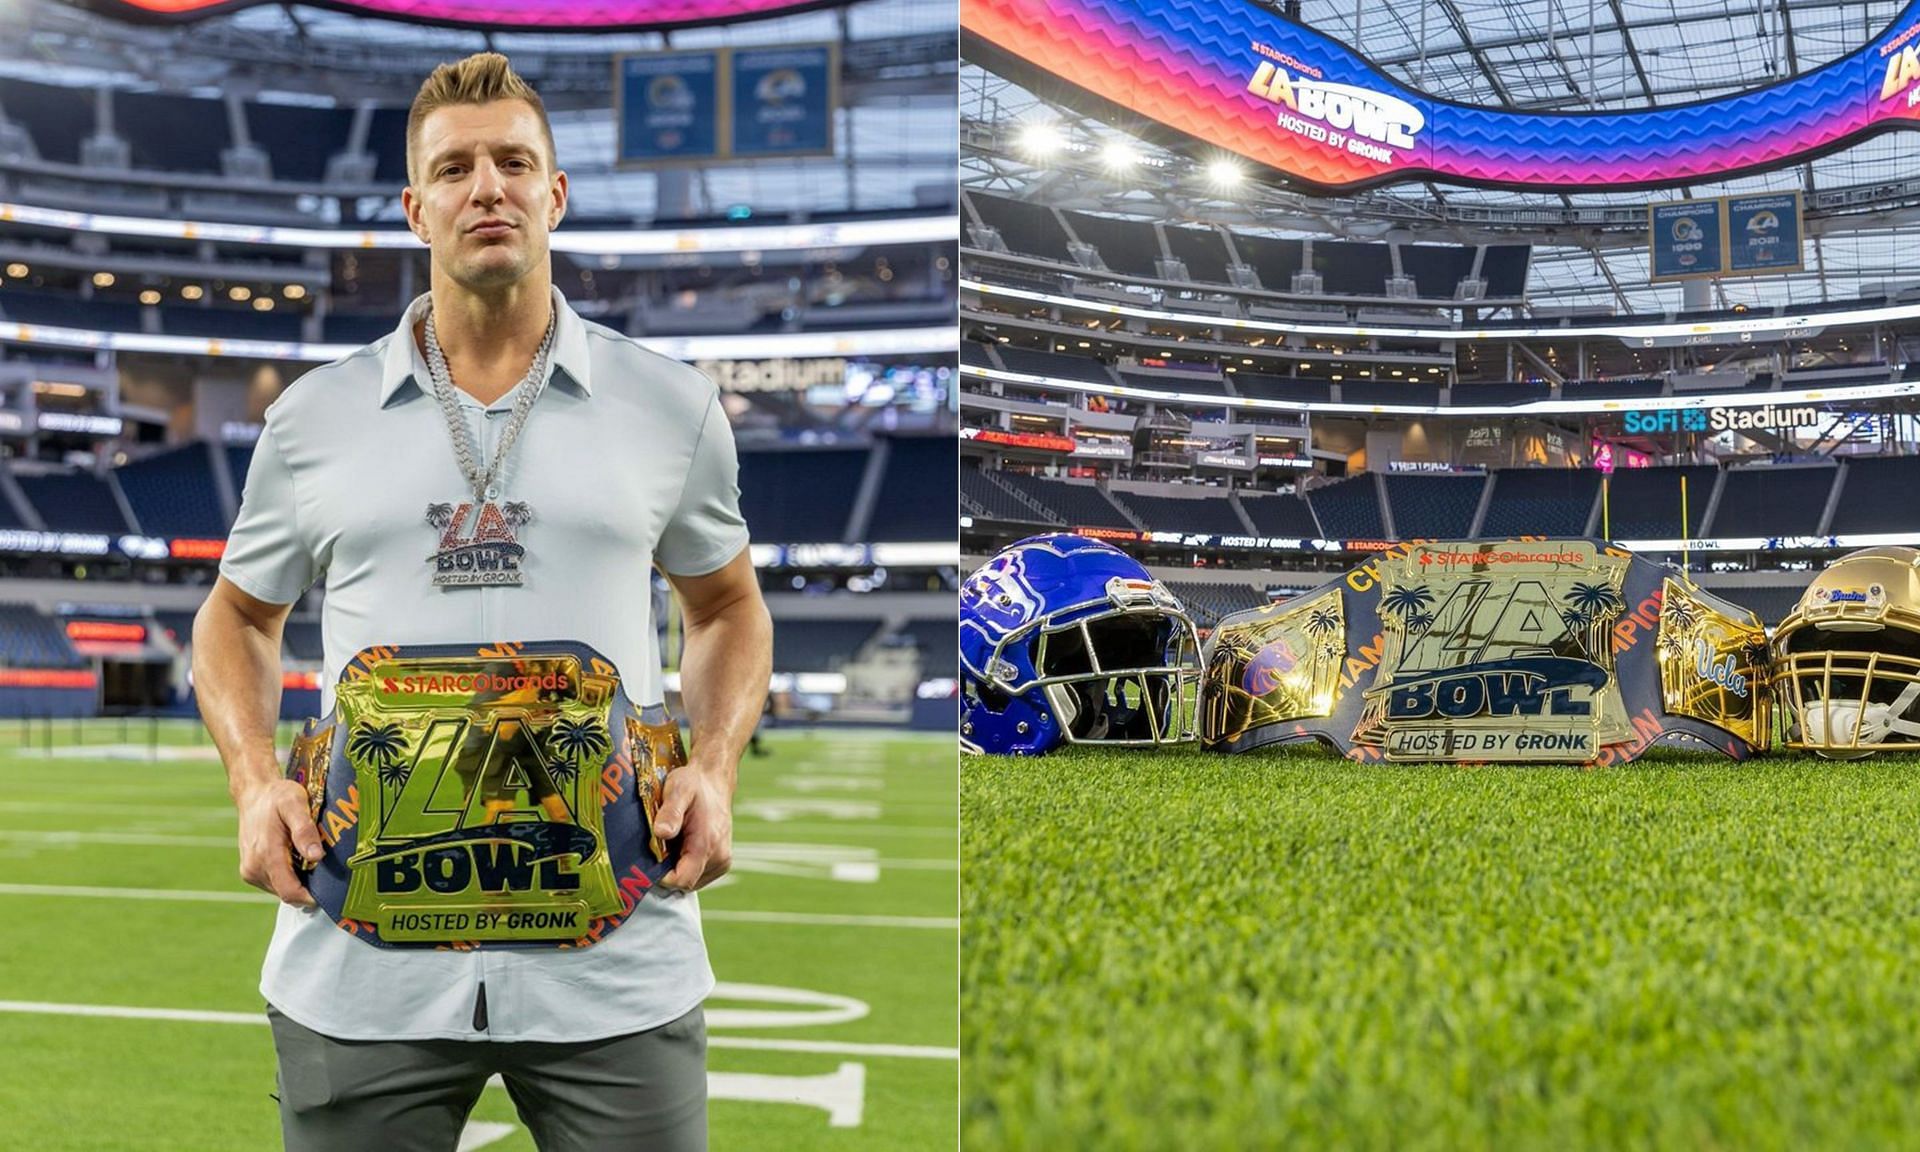 The LA Bowl officially renamed after Rob Gronkowski, via Instagram